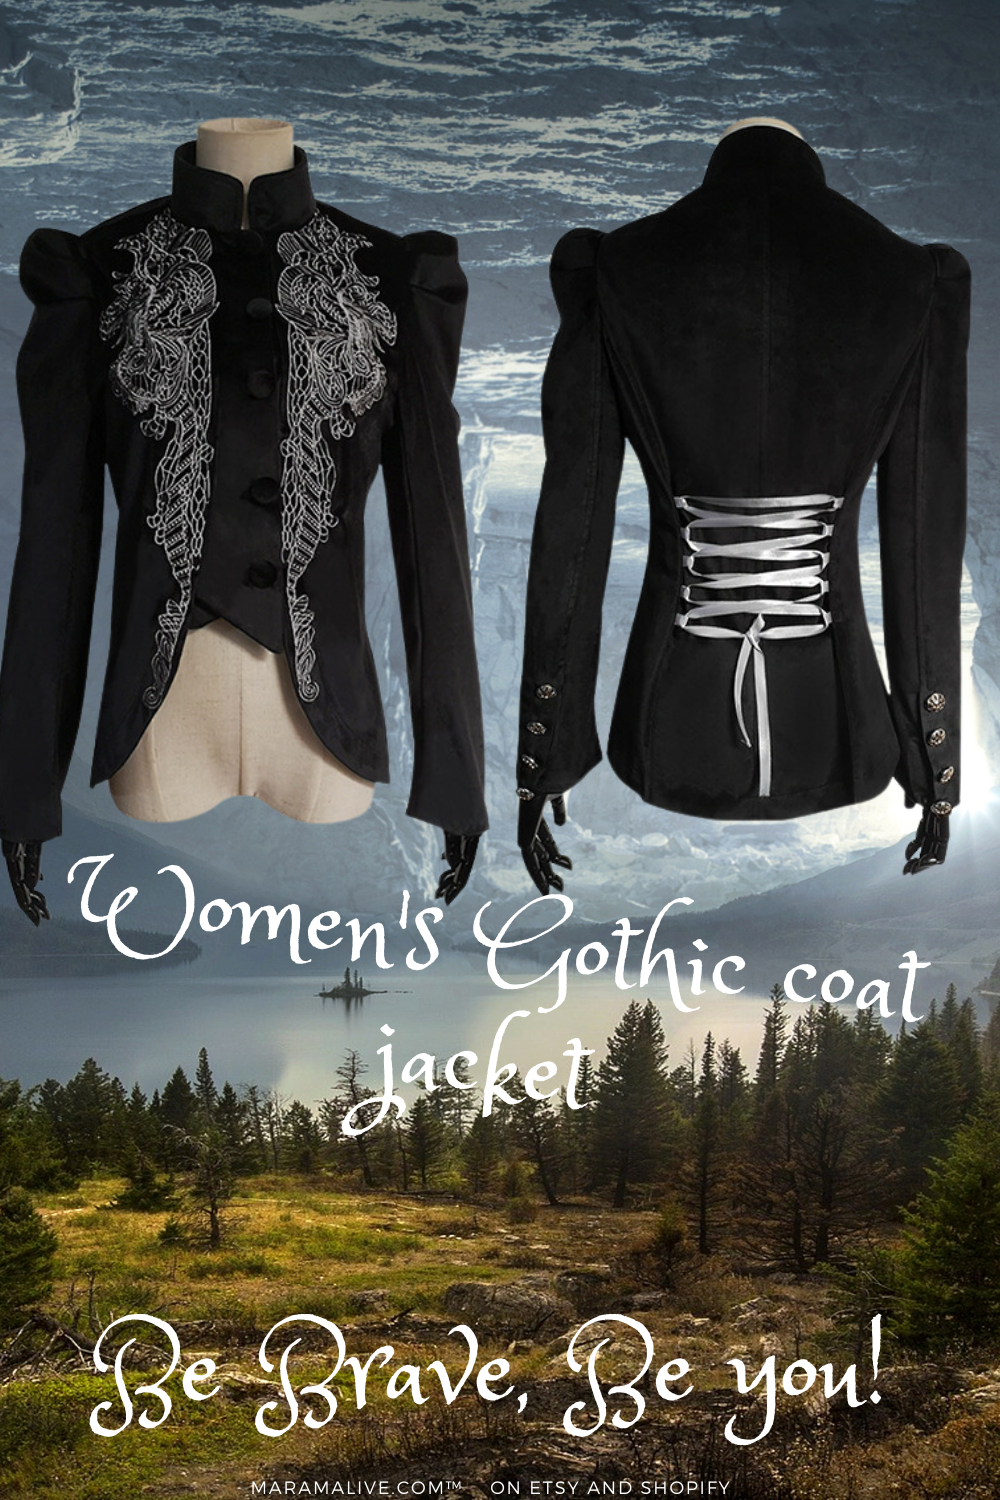 A black Women's Gothic coat jacket with lace and a Maramalive™ mannequin.